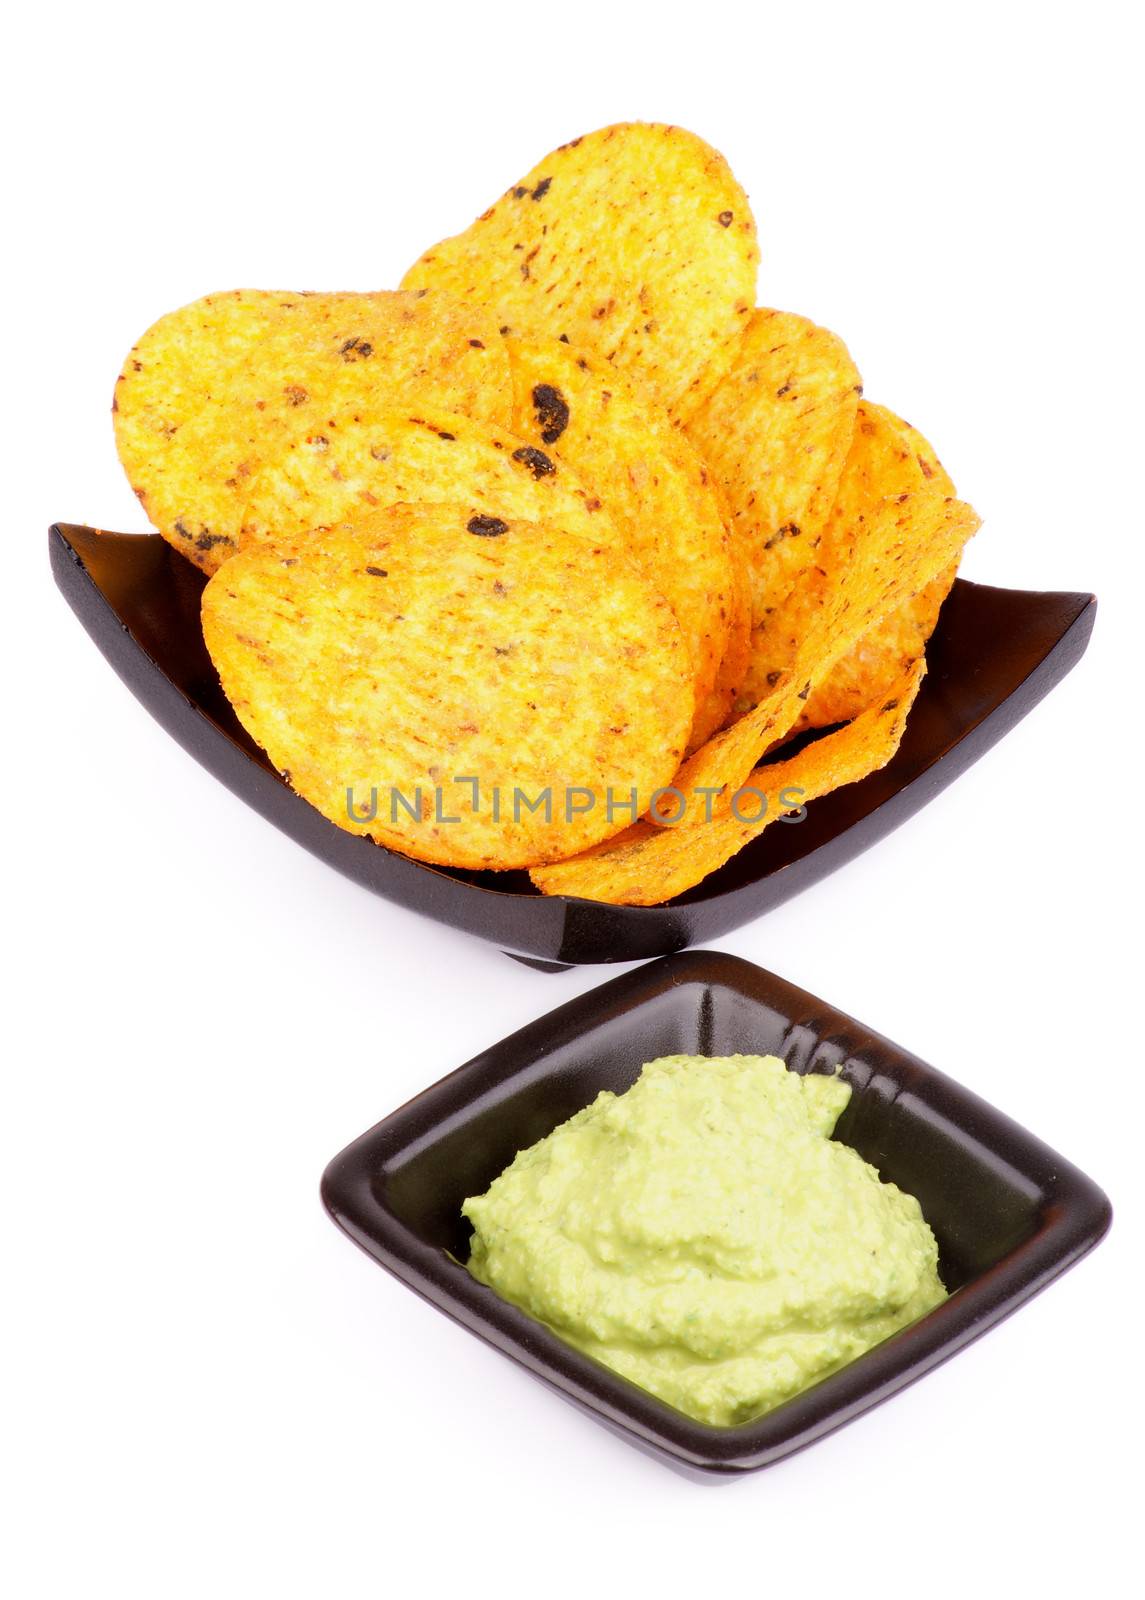 Arrangement of Tortilla Chips and Guacamole Sauce in Black Bowls isolated on White background